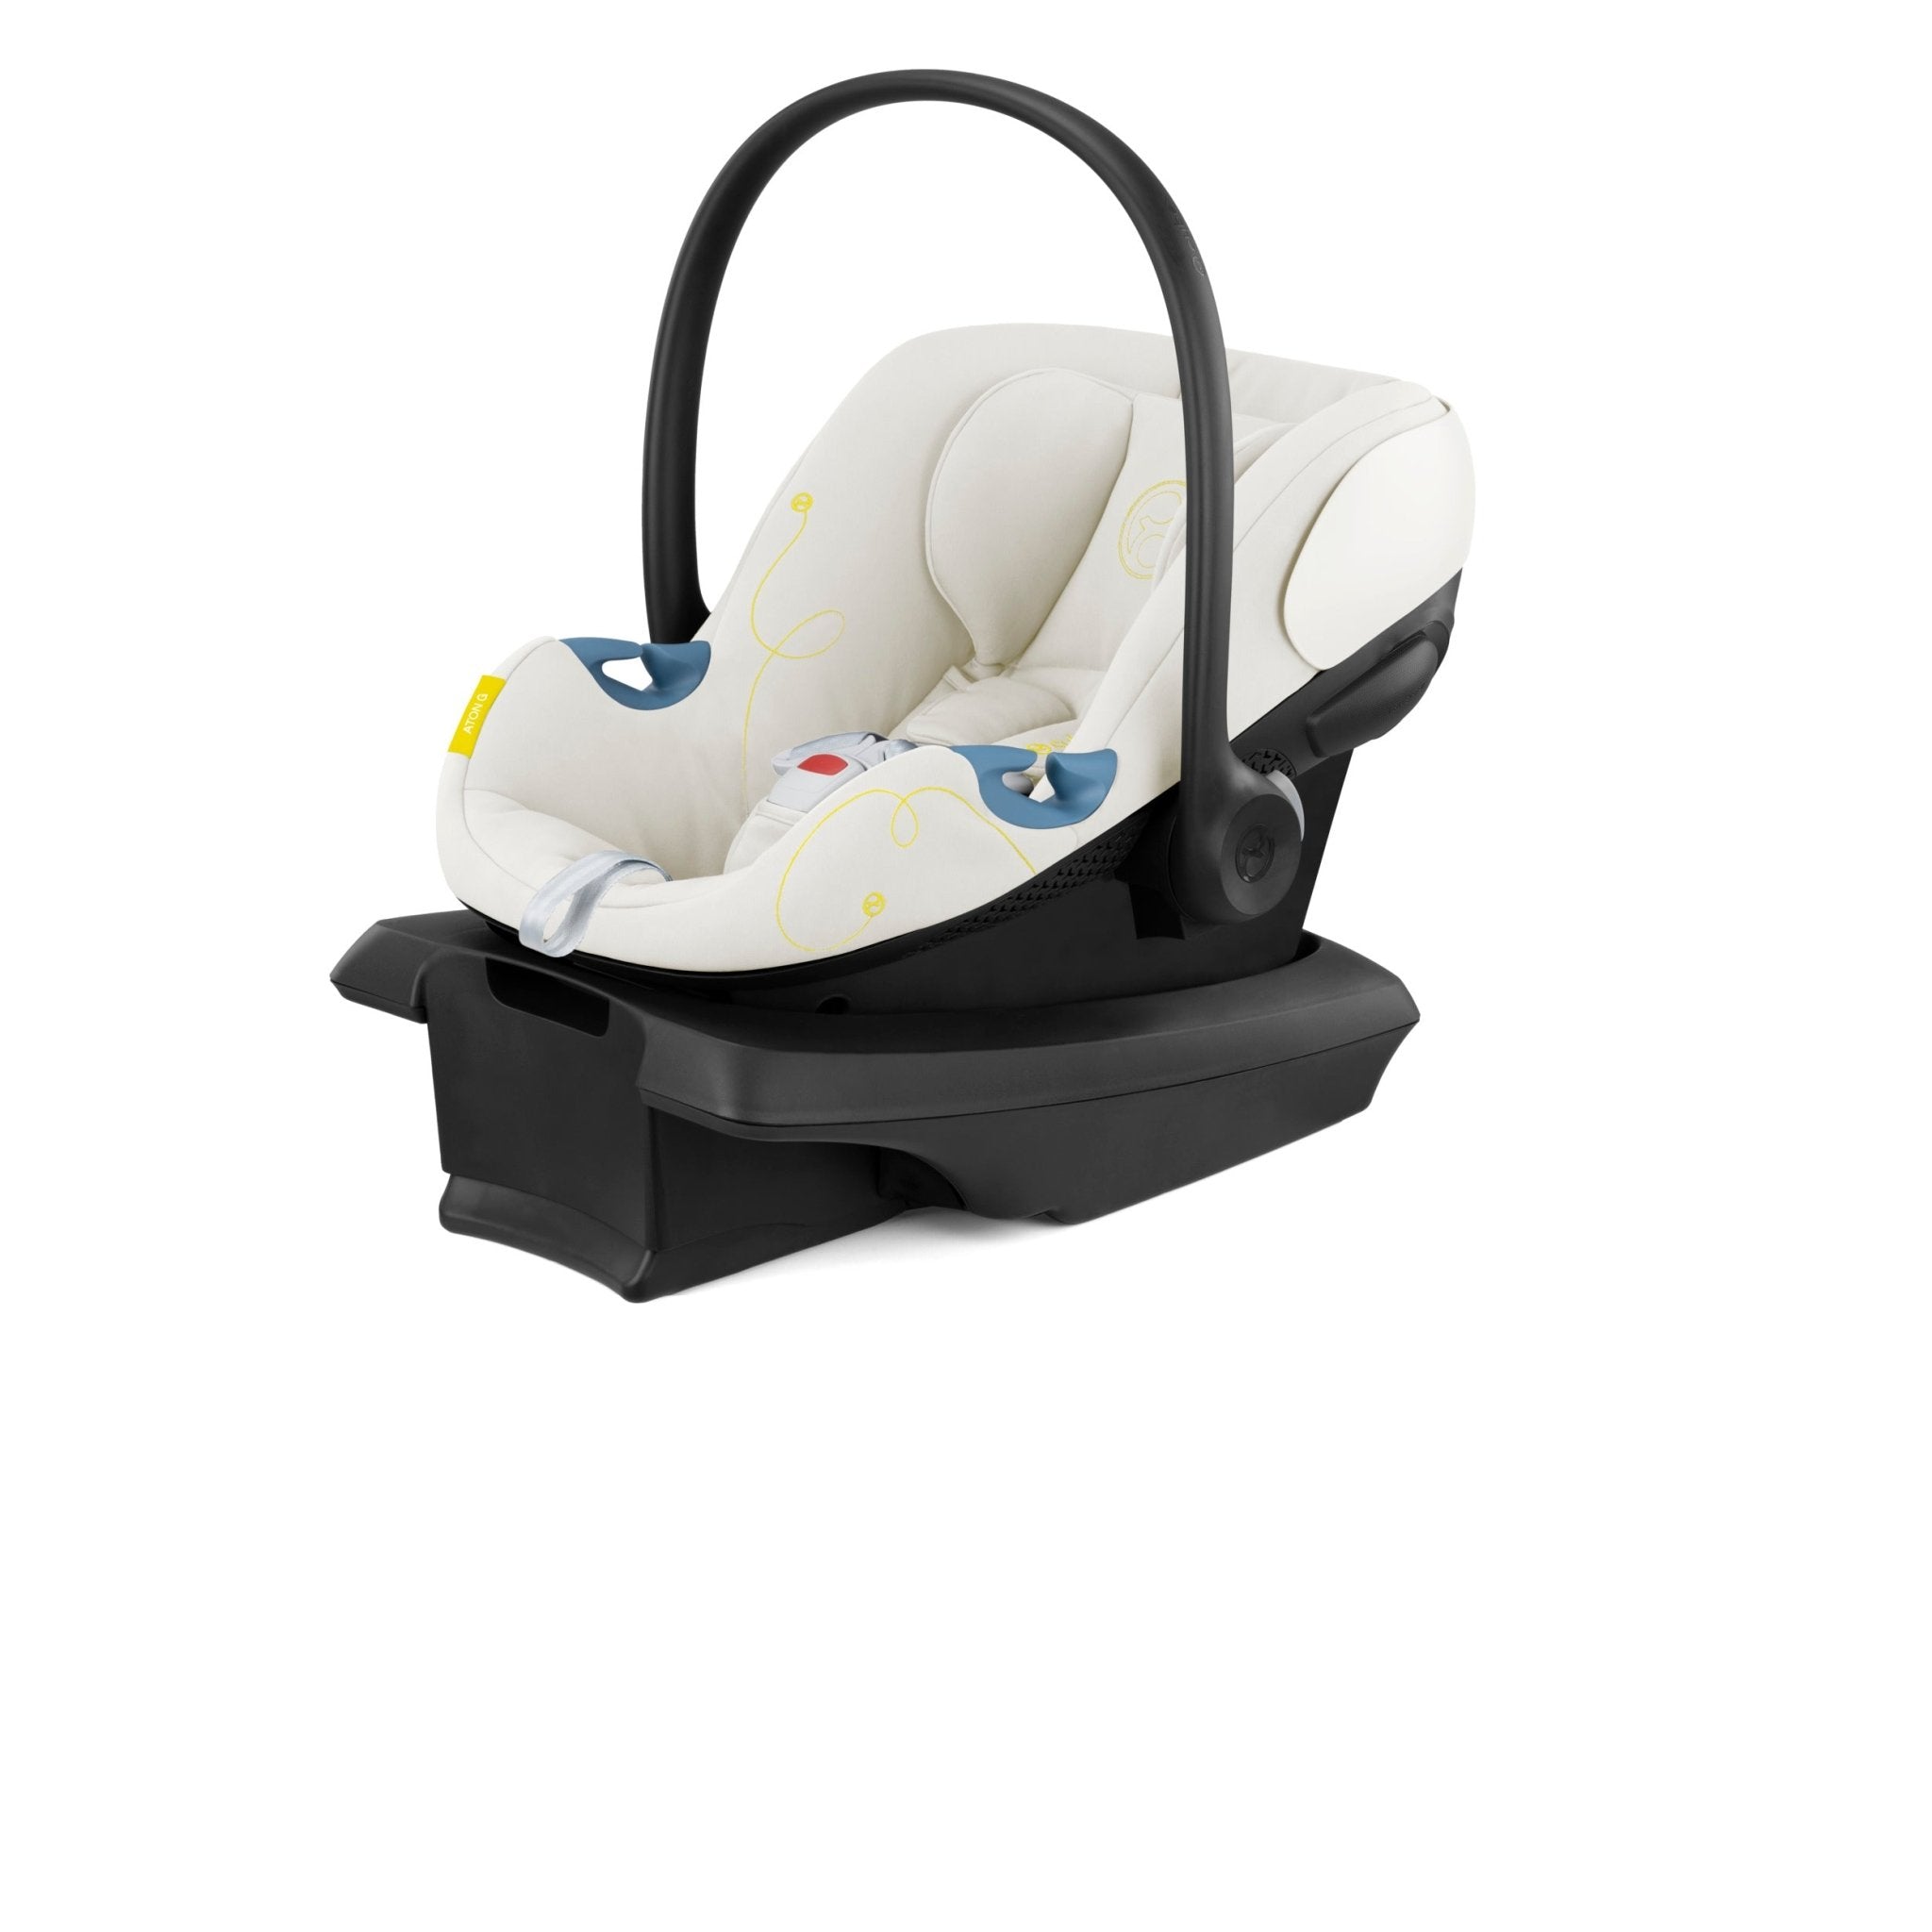 Cybex Aton G Infant Car Seat - Seashell Beige -- Available December